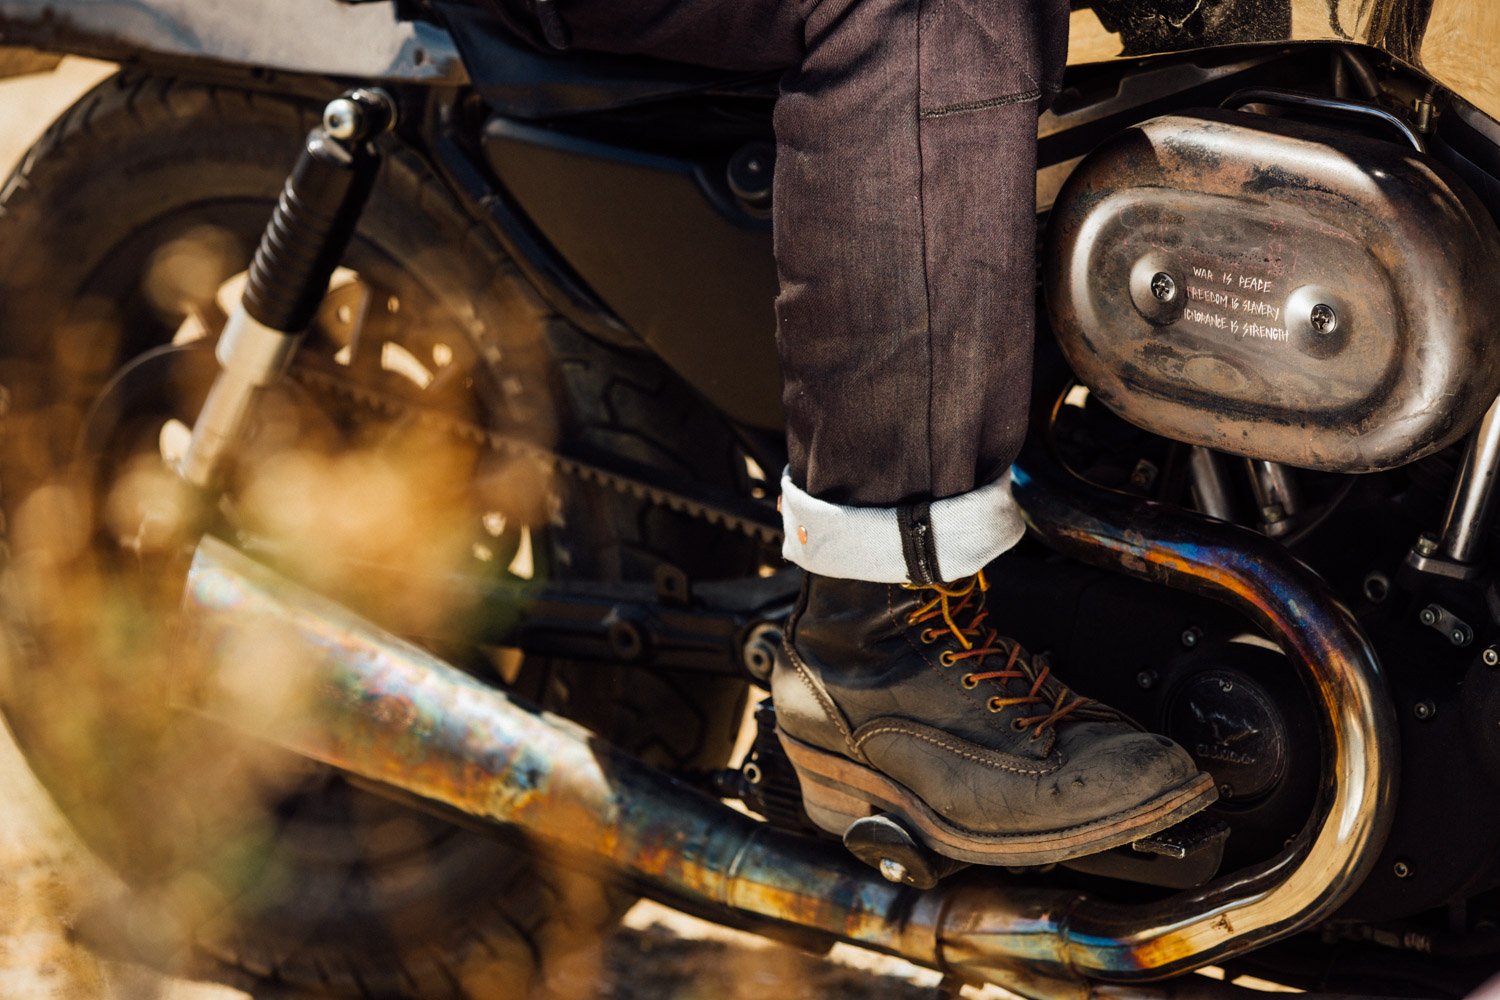 Rider jeans can now be designed that increase safety without losing any sense of freedom or style and newer versions of Dyneema Denim are also currently being developed in different colors and with water-repellent finishes. © Dyneema. 